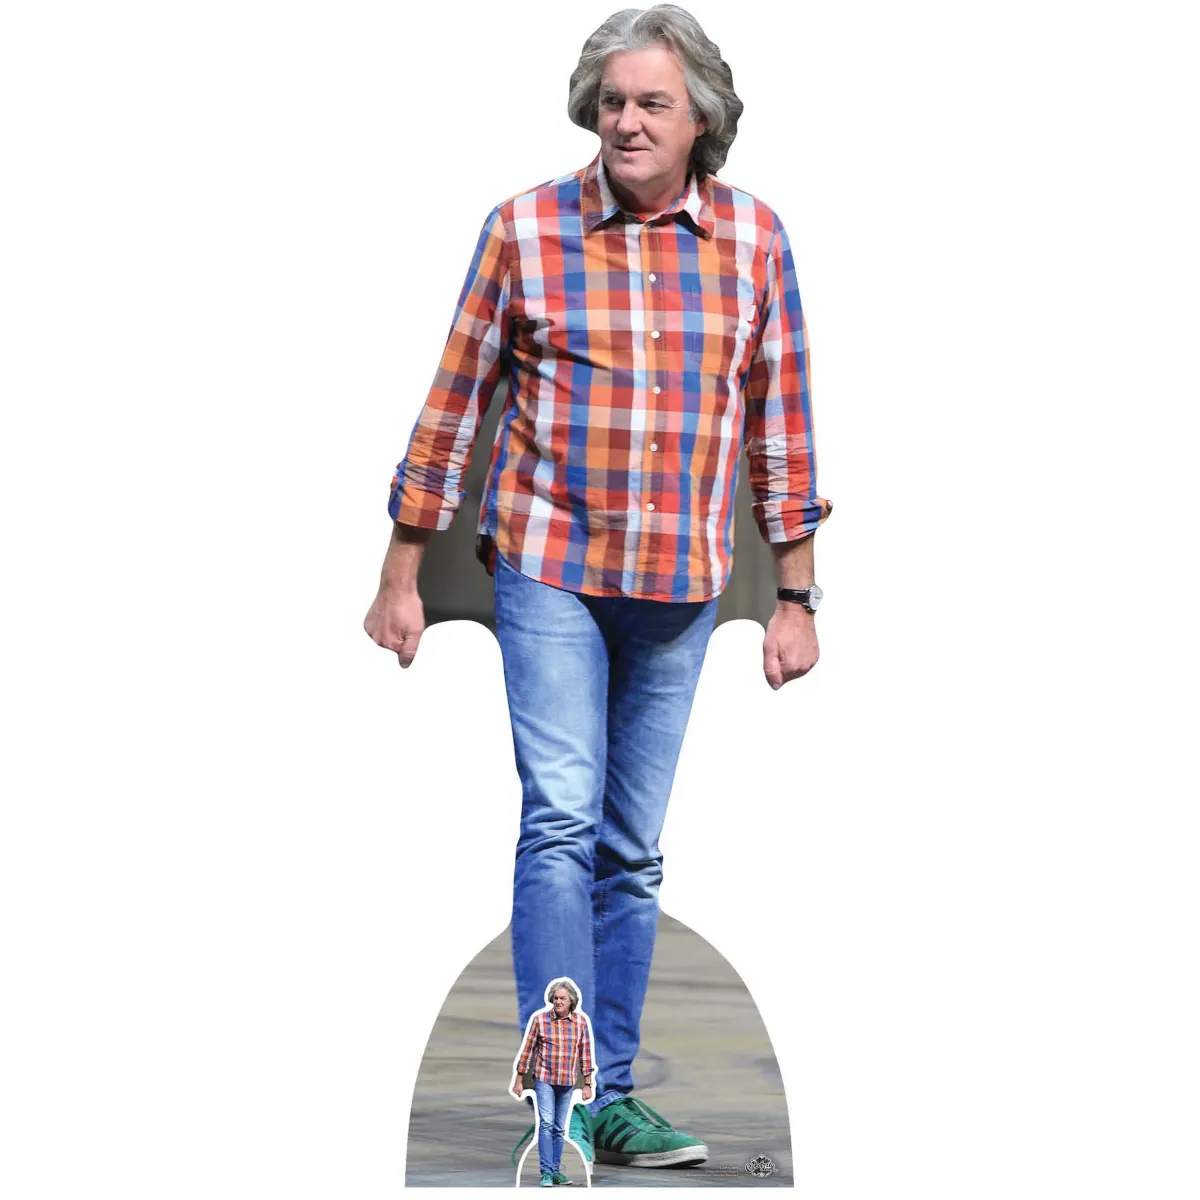 CS713 James May (Television Presenter) Lifesize + Mini Cardboard Cutout Standee Front